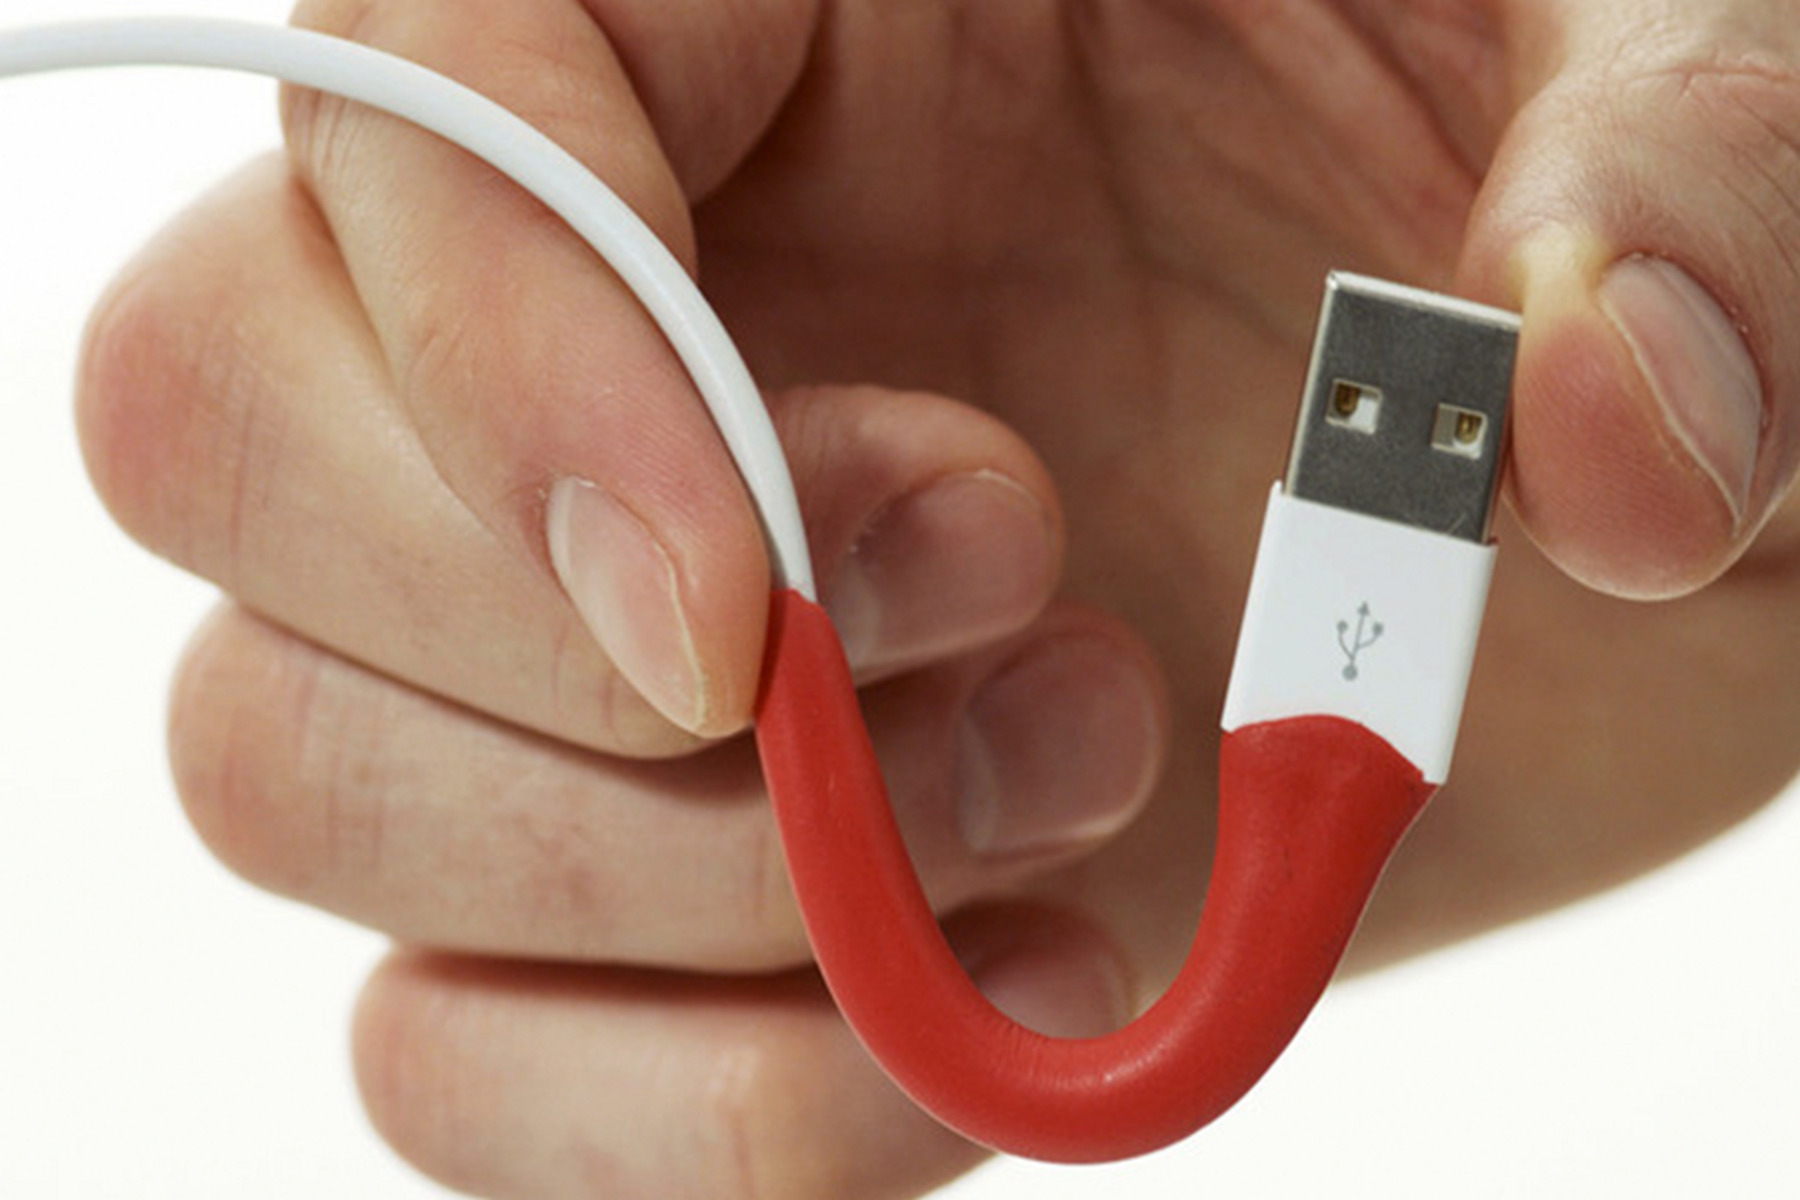 DIY Guide To Repairing USB Chargers: Quick Fixes